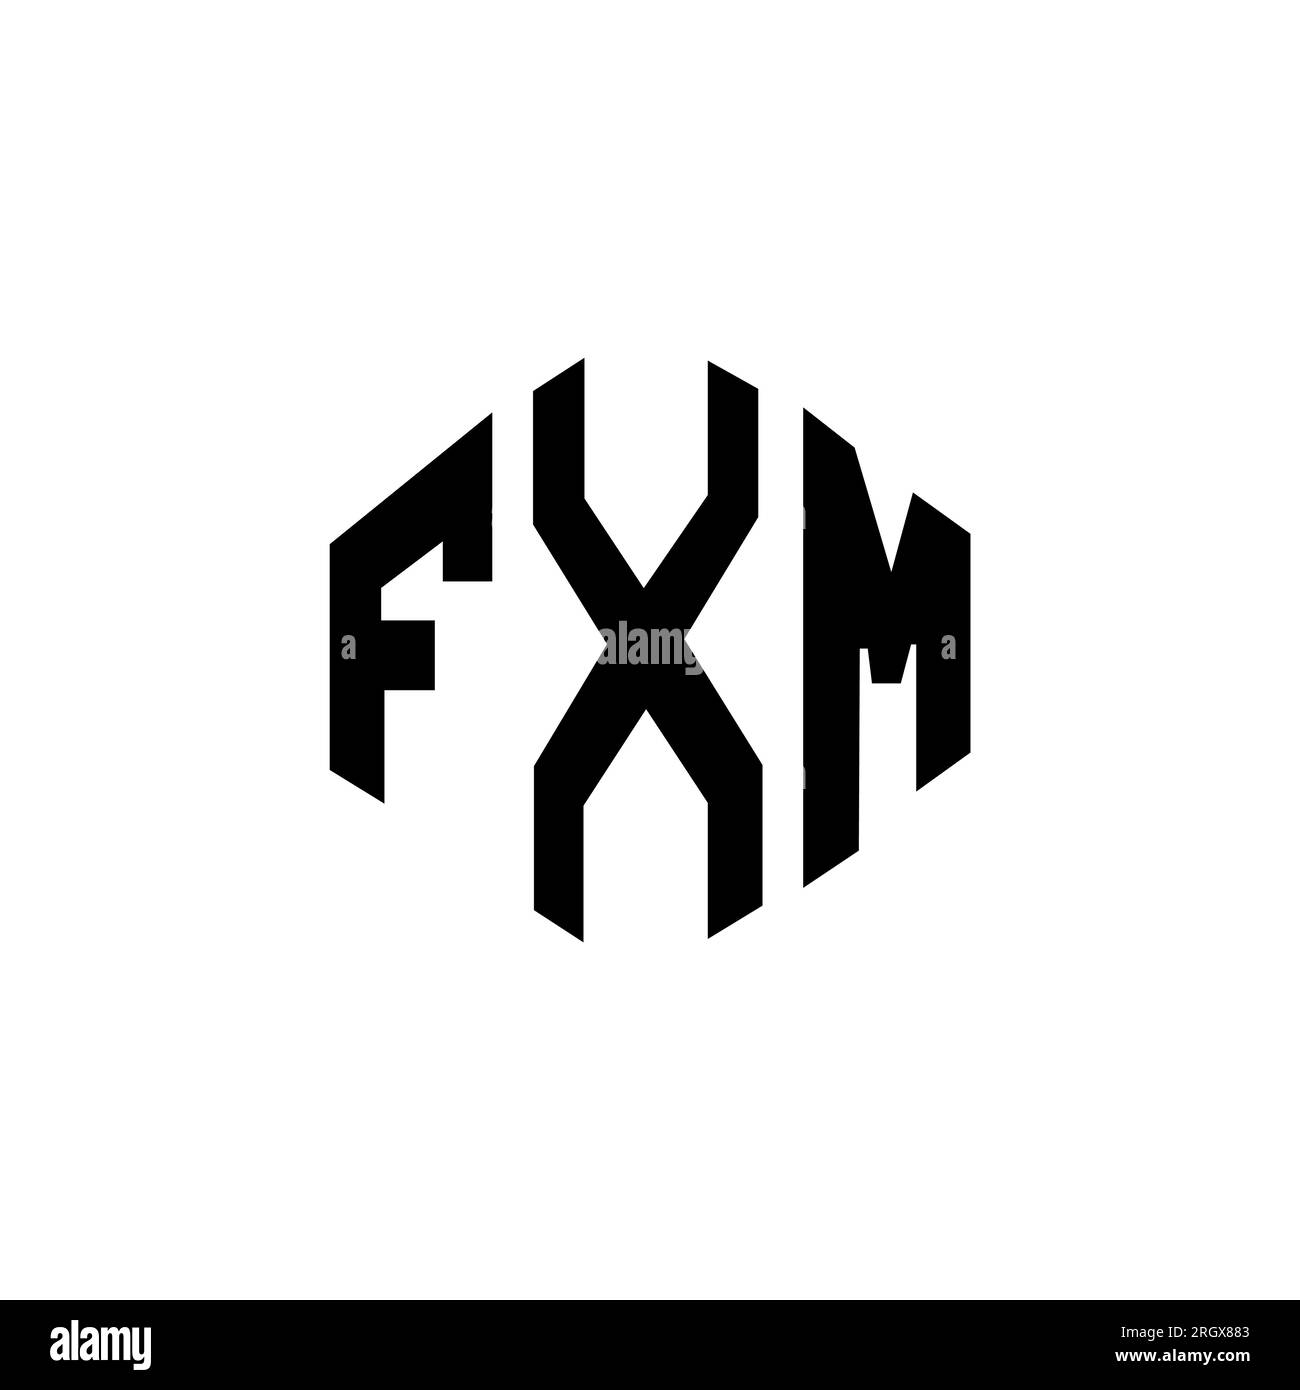 Fx logos Cut Out Stock Images & Pictures - Alamy